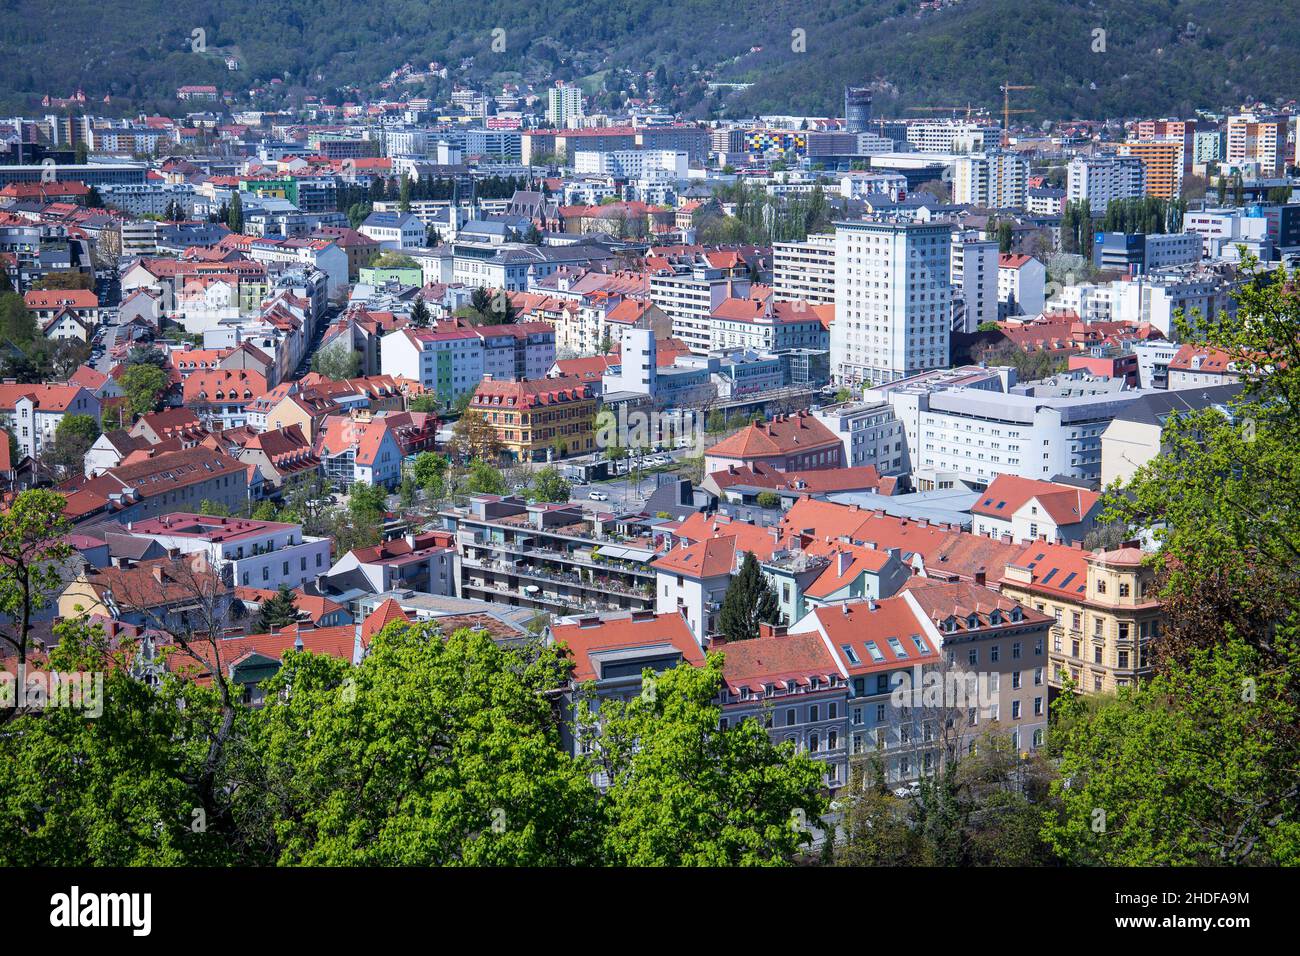 Aerial view over the city of Graz Stock Photo